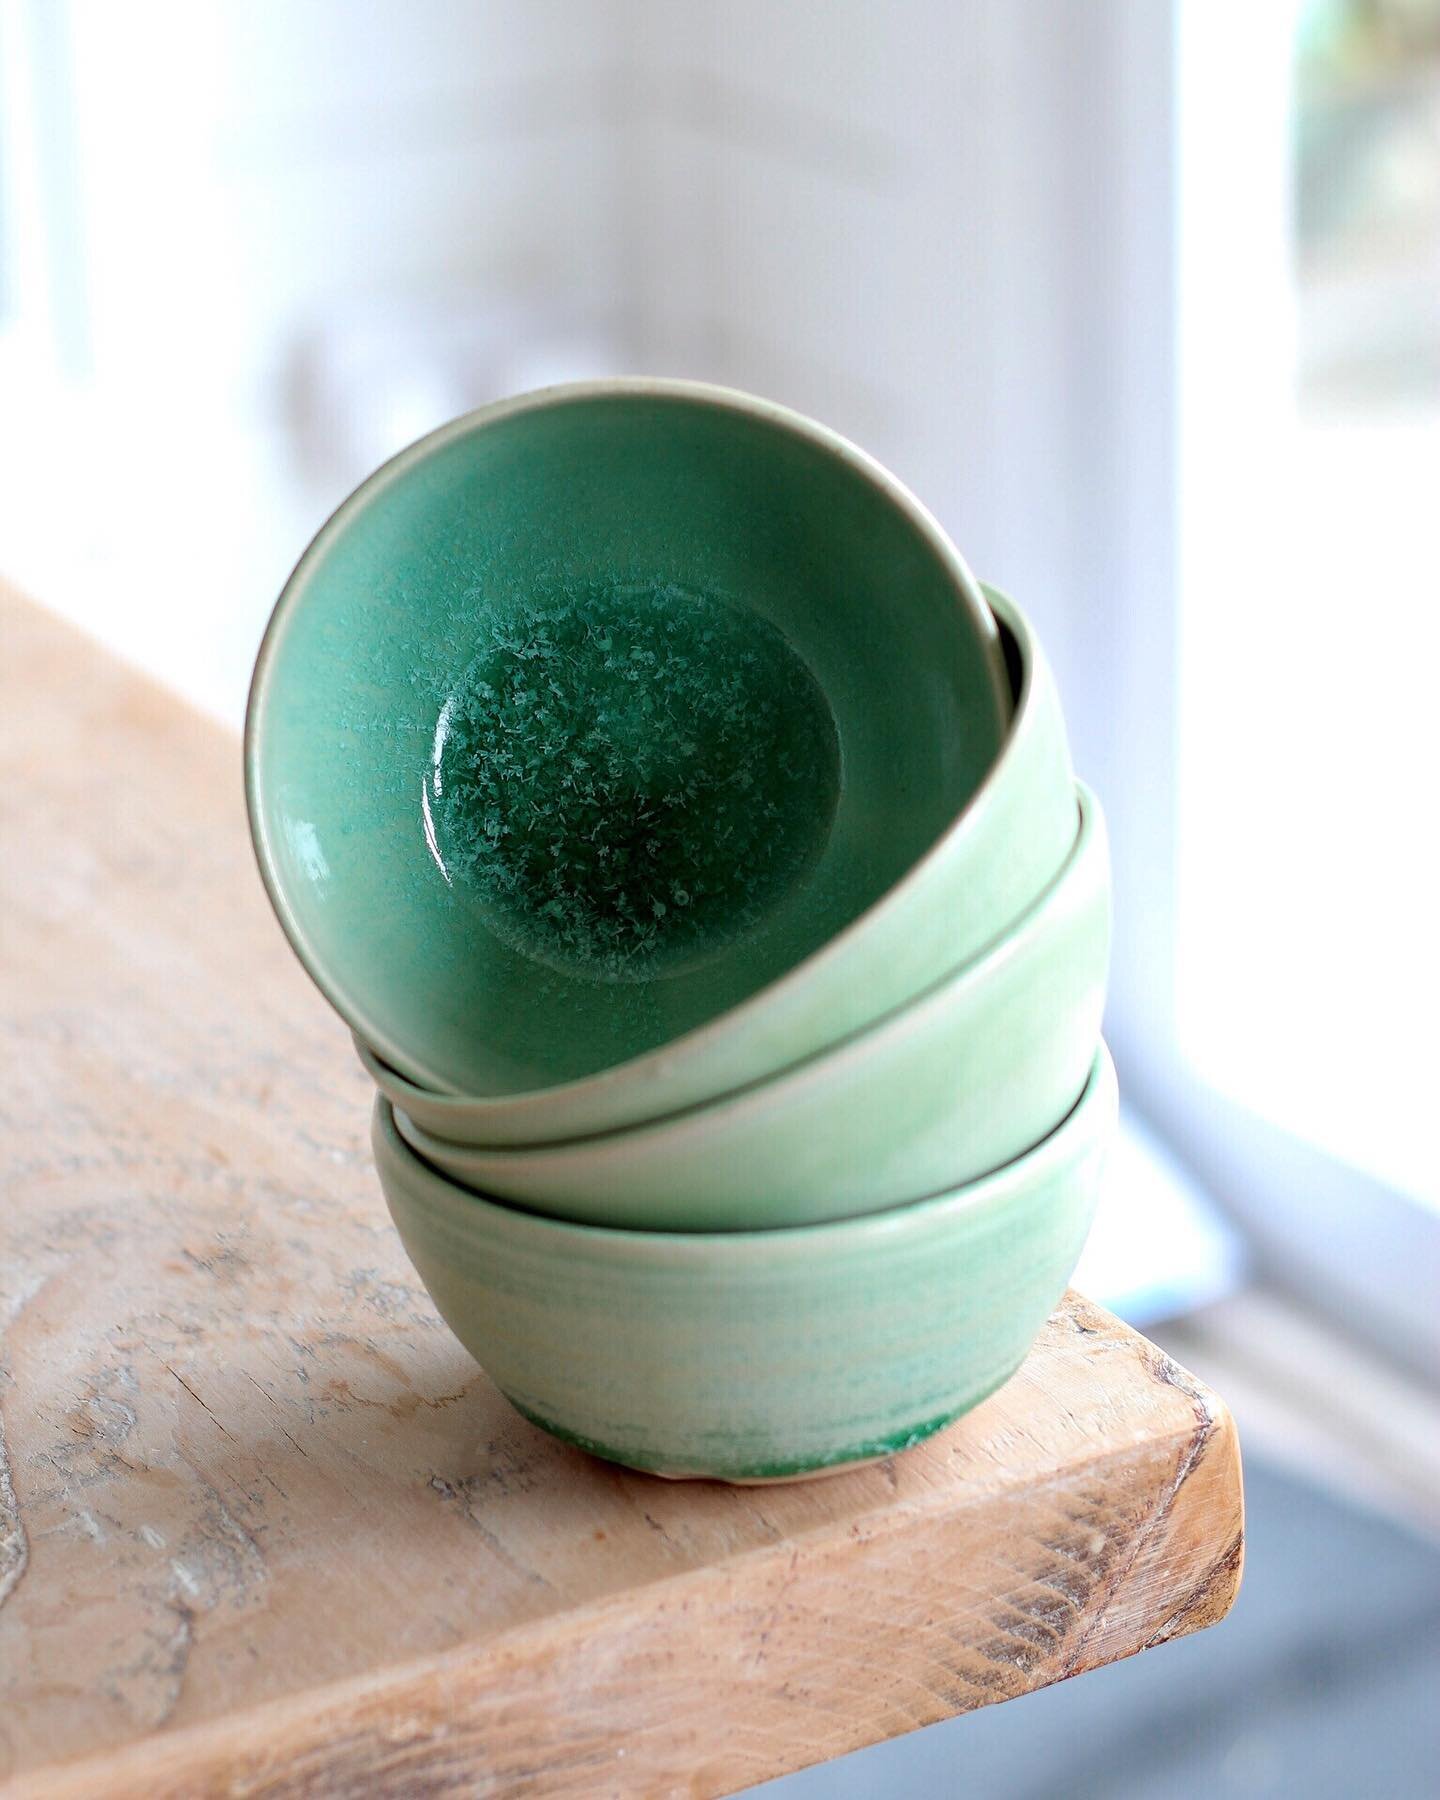 A Beginners Guide To Making Your Own Pottery Glaze - Step By Step